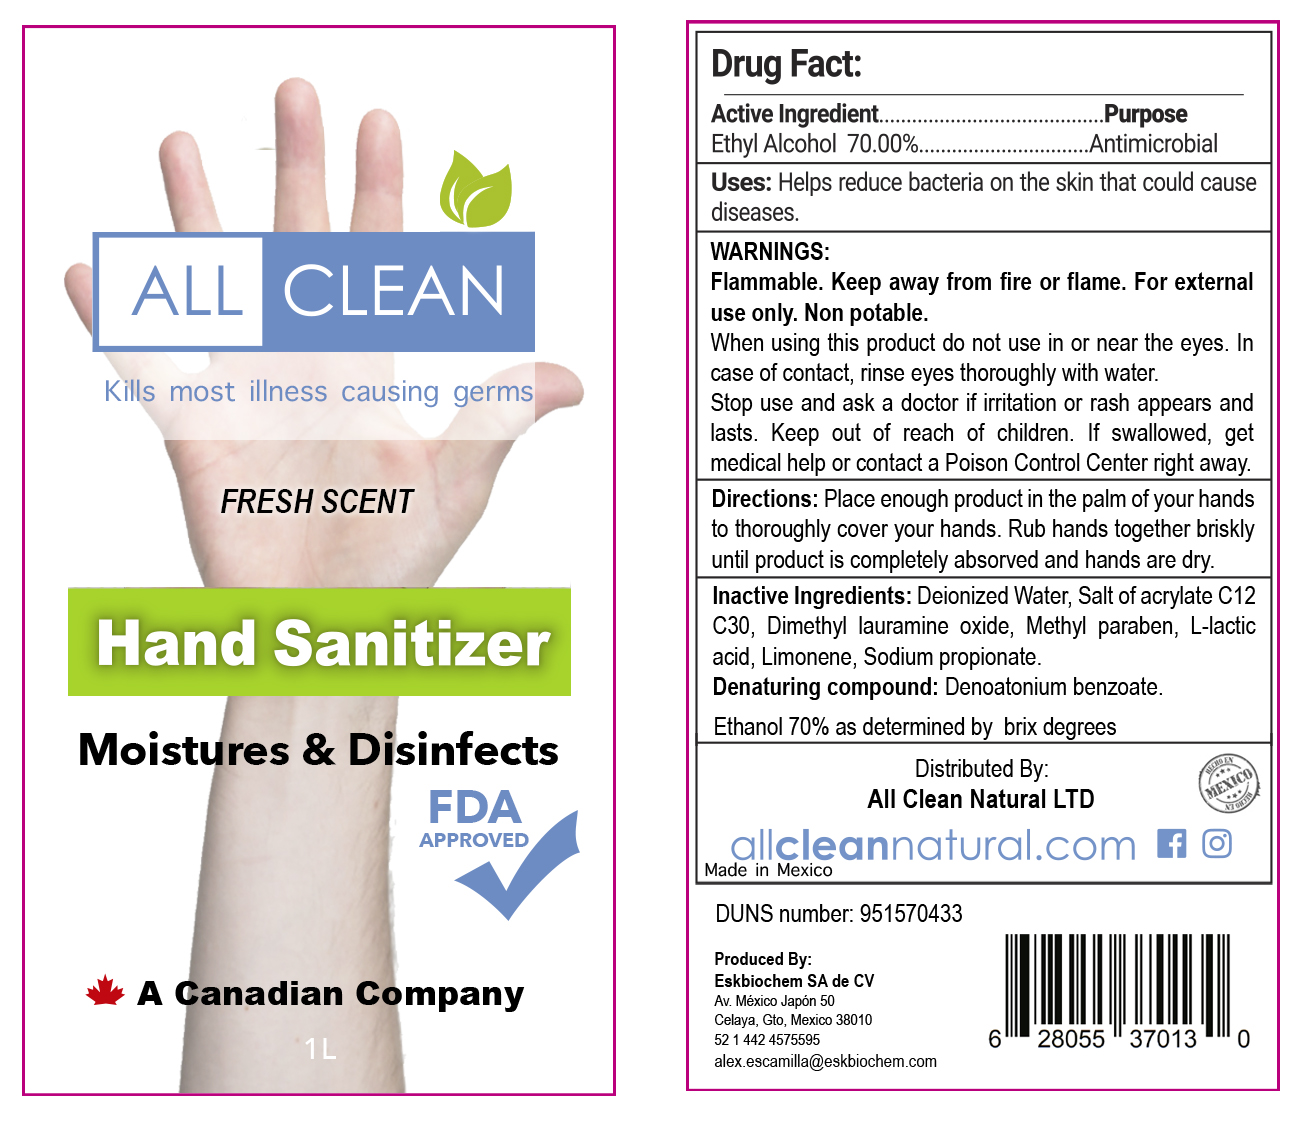 ALL-CLEAN LABEL